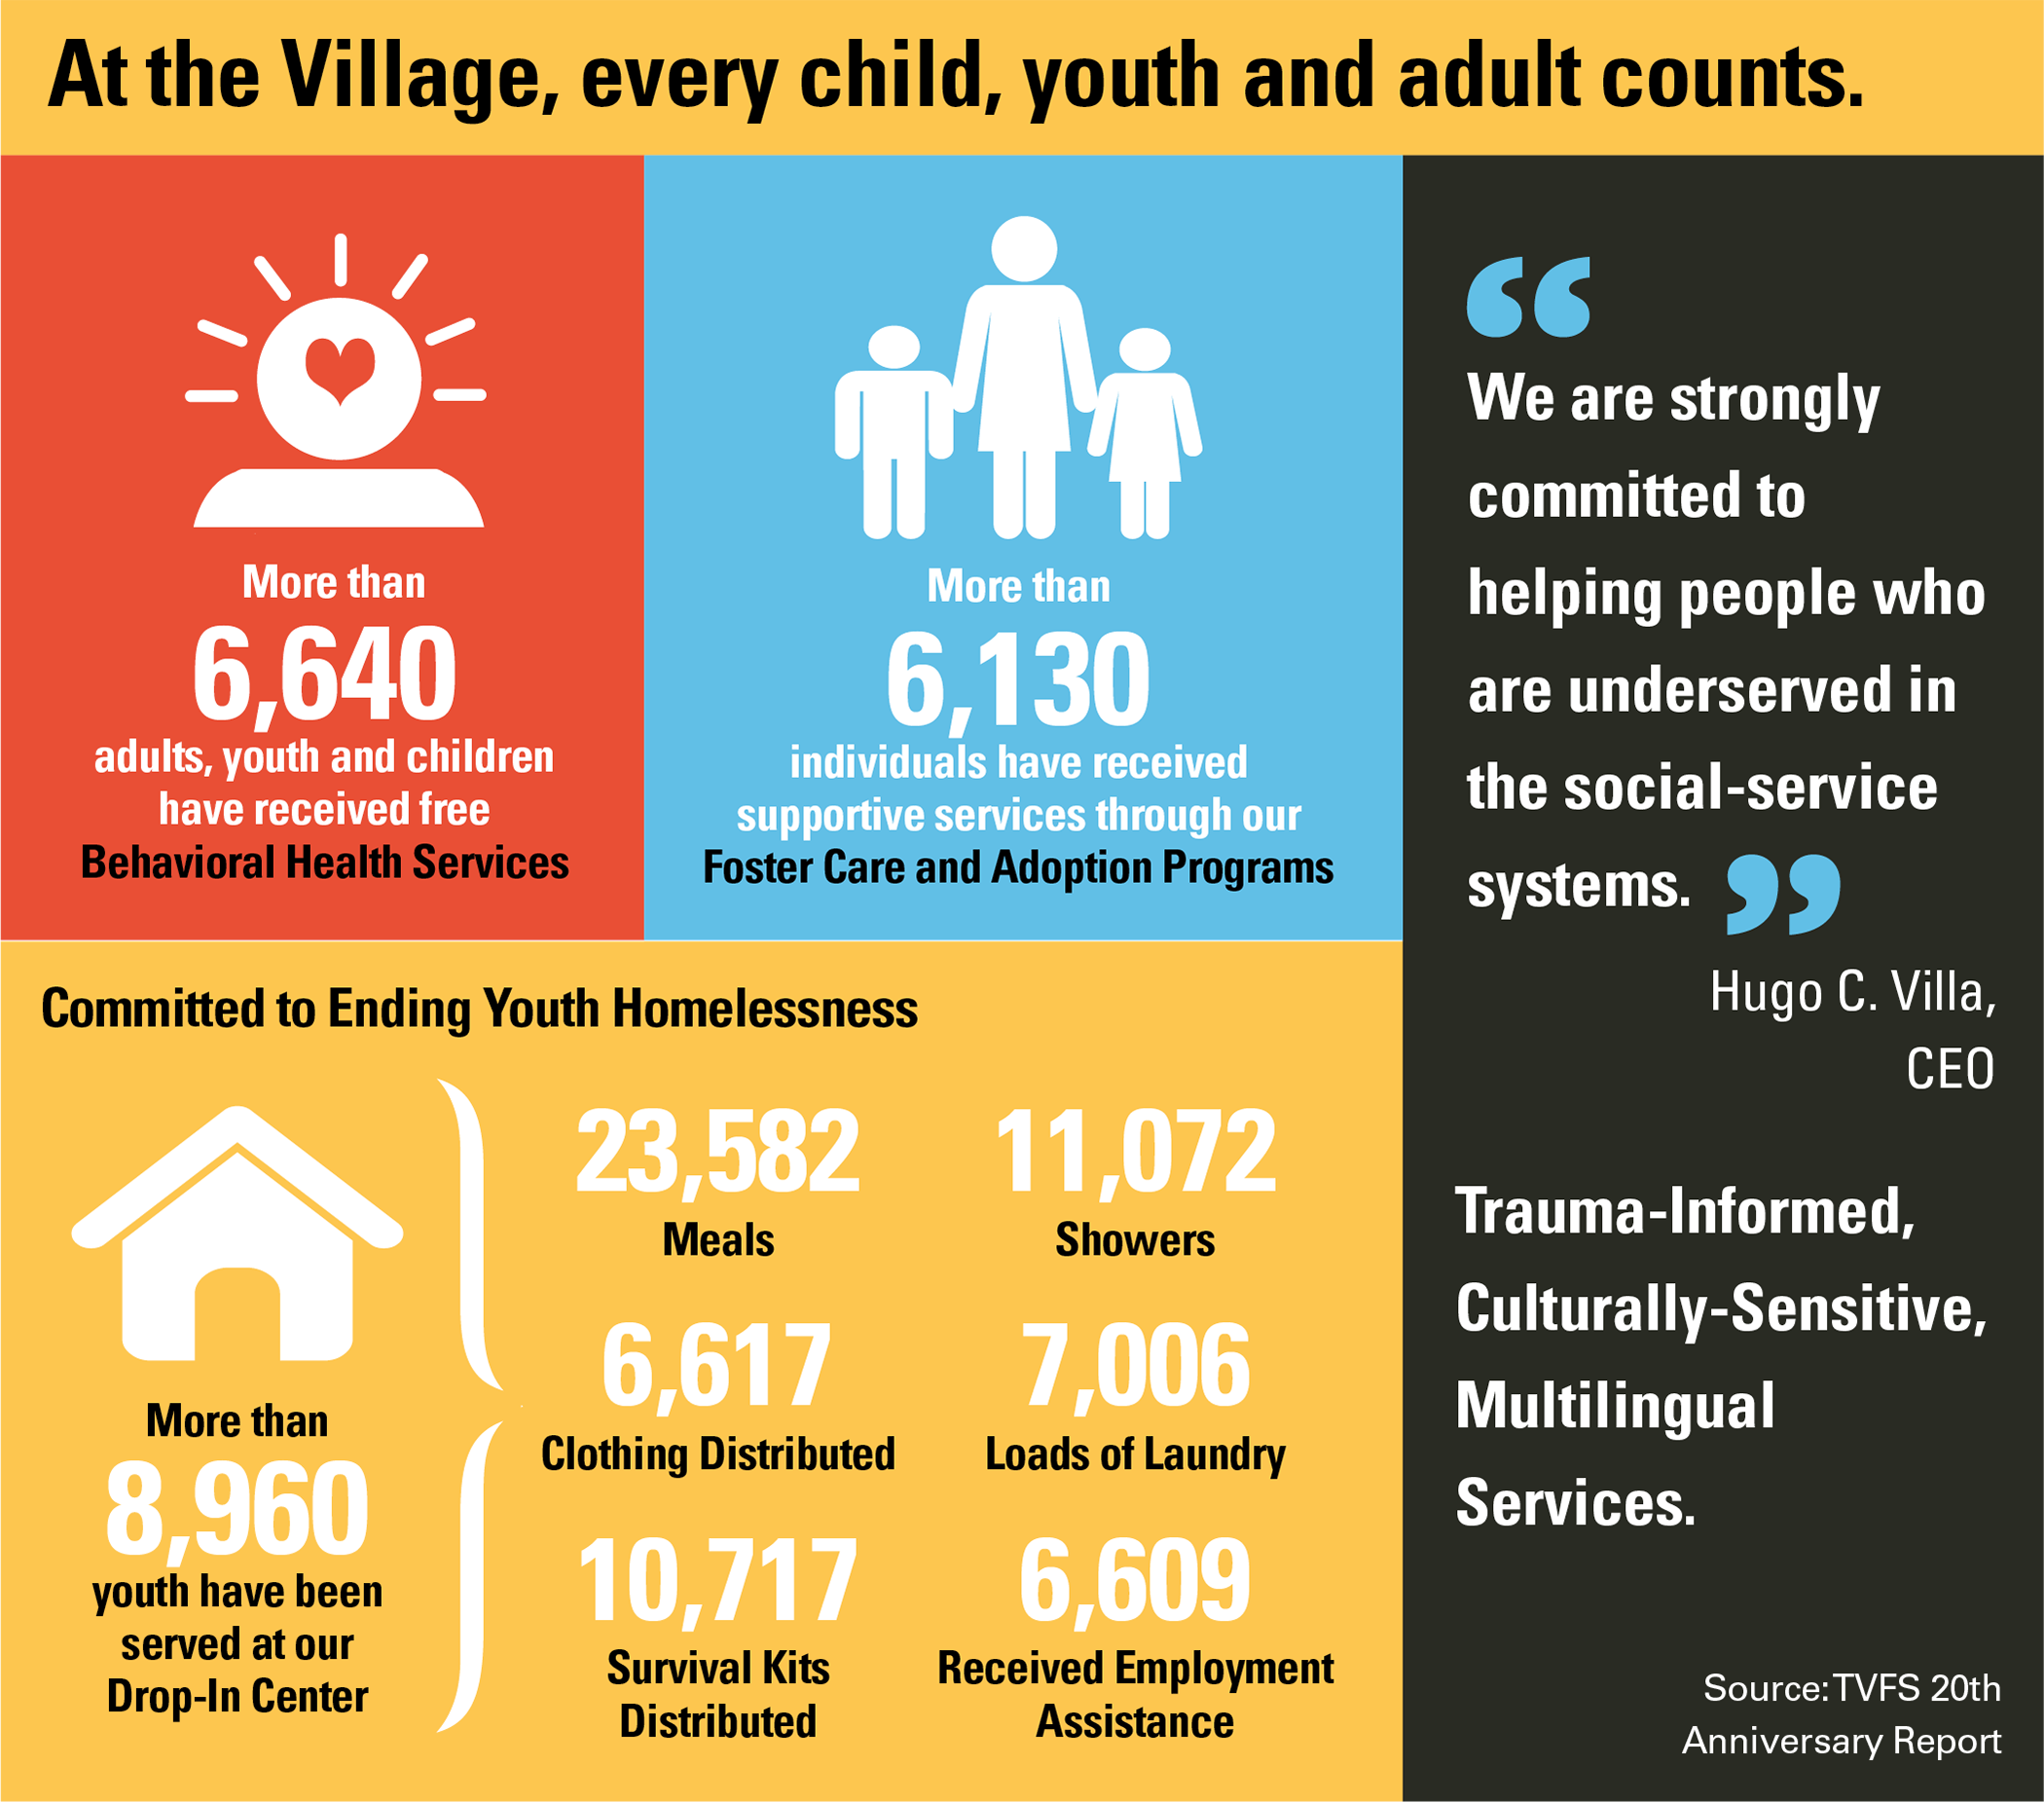 At the Village, every child, youth and adult counts